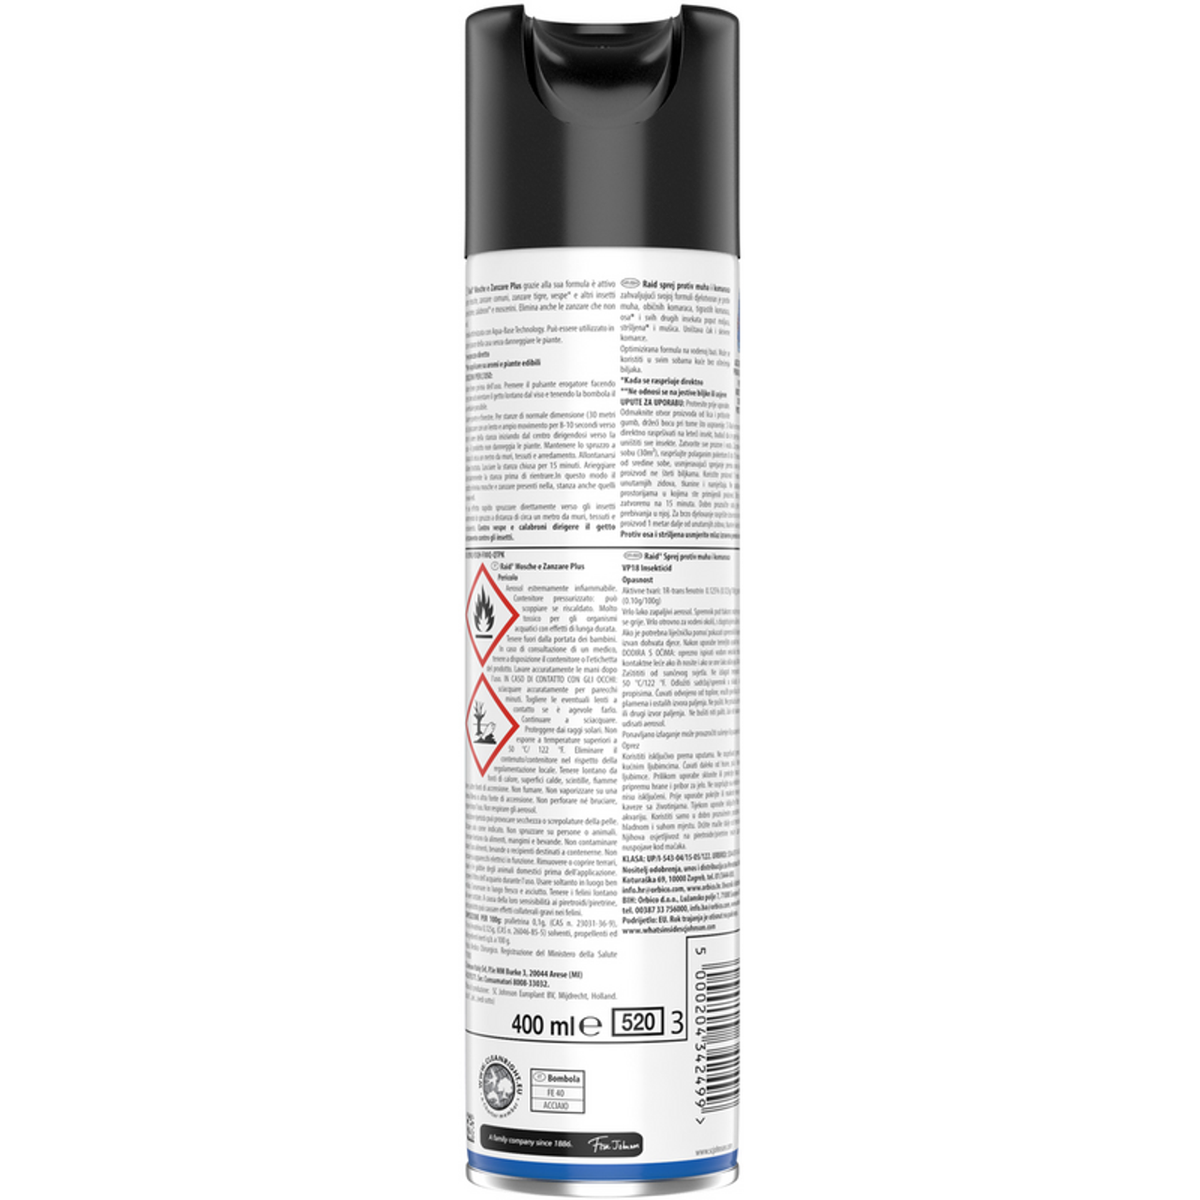 Raid Insecticide spray flies and mosquitoes plus rapid action aqua-base technology 400 ml